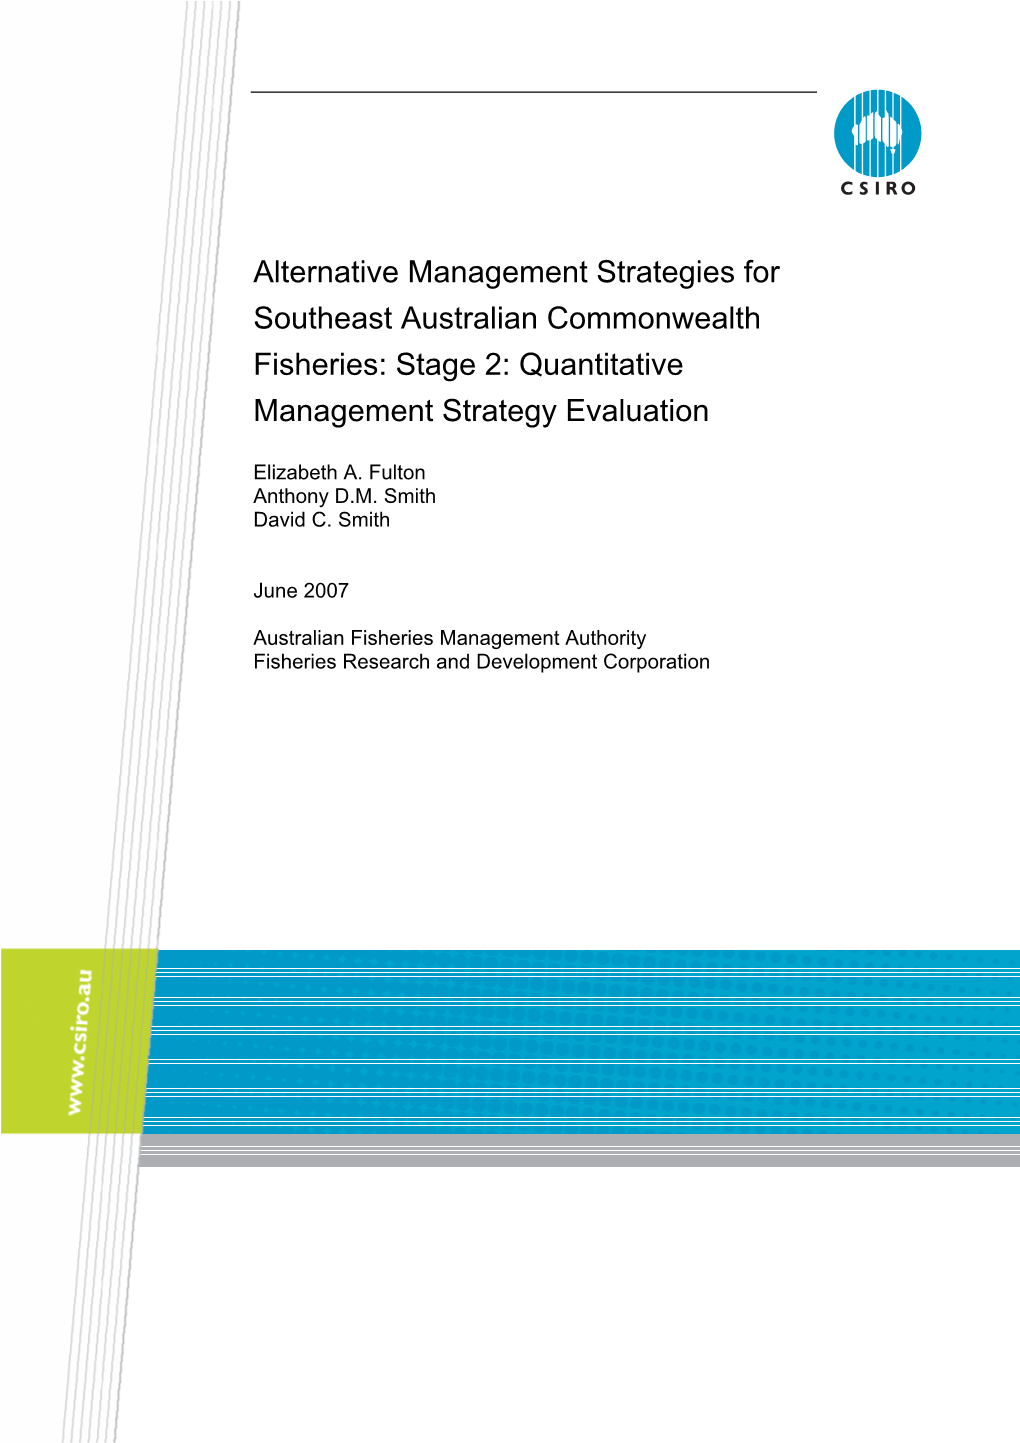 Alternative Management Strategies for Southeast Australian Commonwealth Fisheries: Stage 2: Quantitative Management Strategy Evaluation